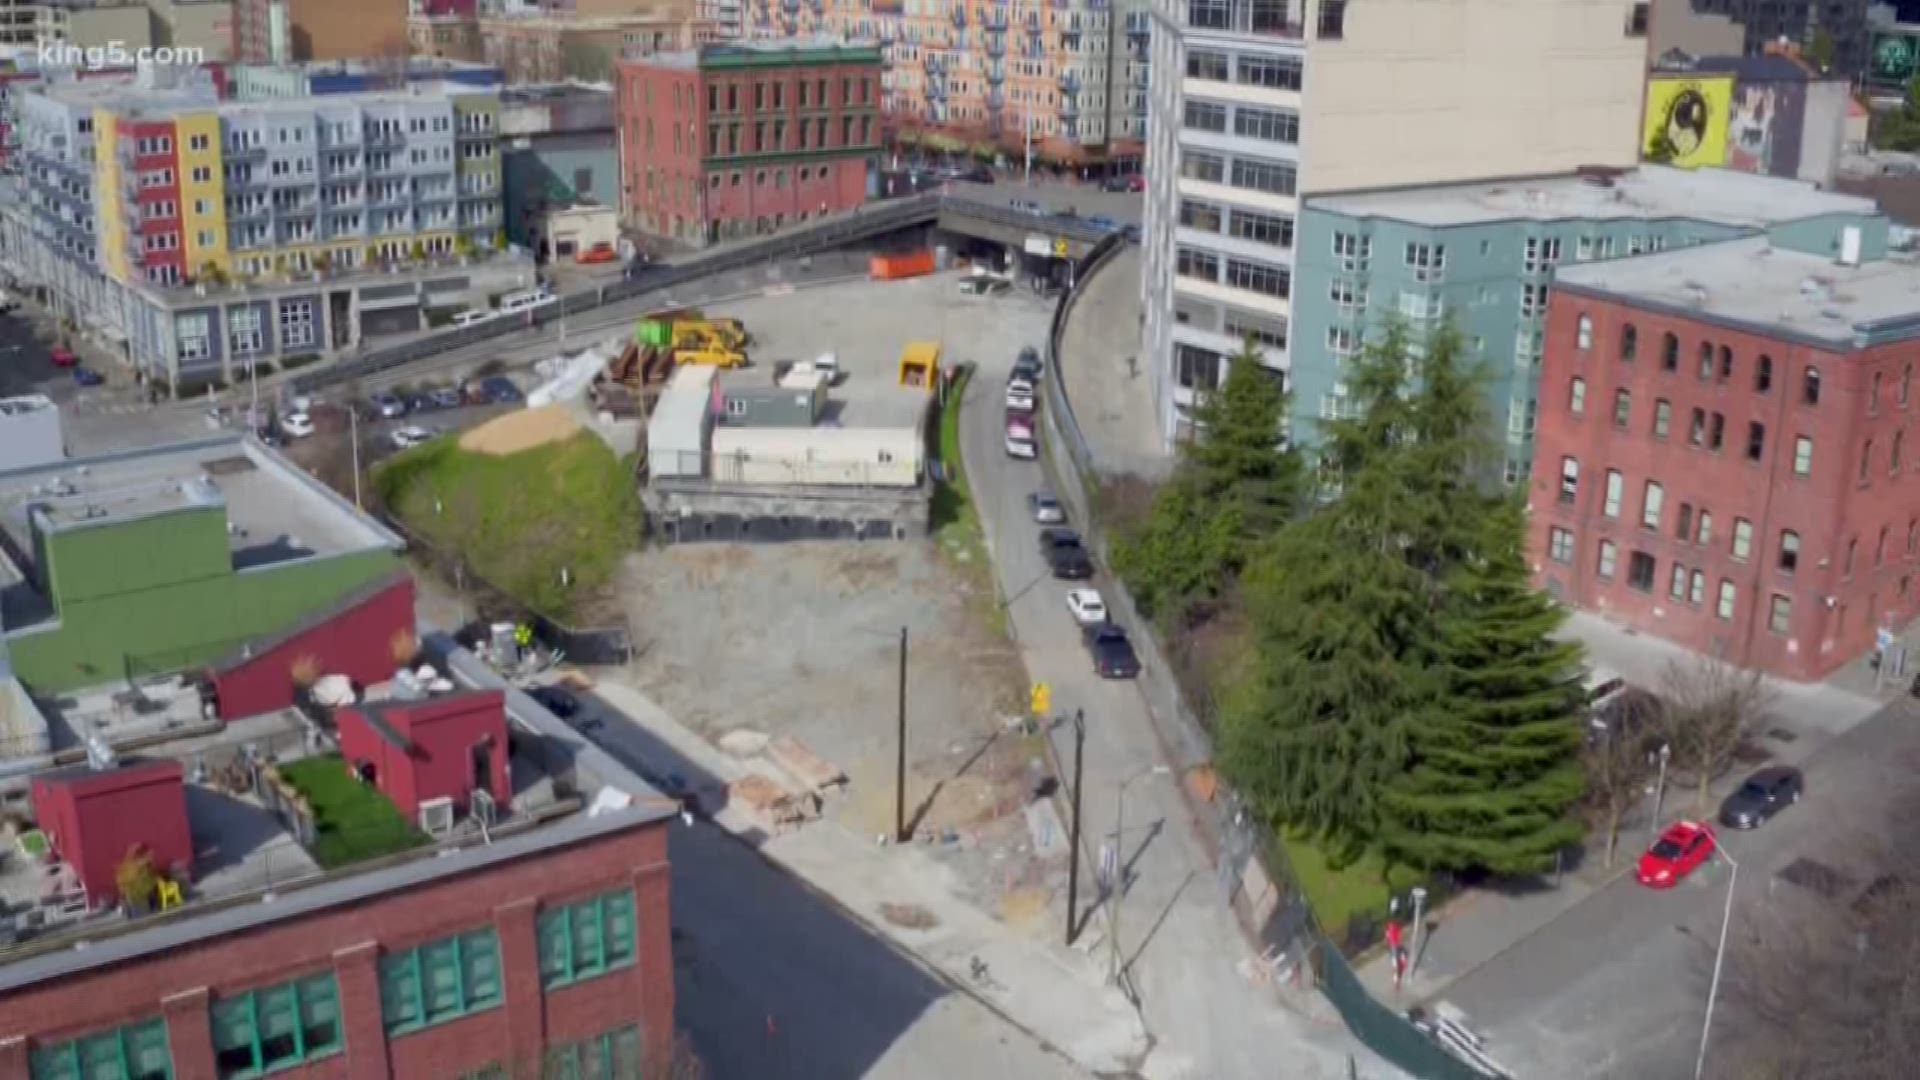 The City of Seattle and Seattle School District have begun exploratory talks about placing a new K-8 school near the south portal of the old Battery Street tunnel.